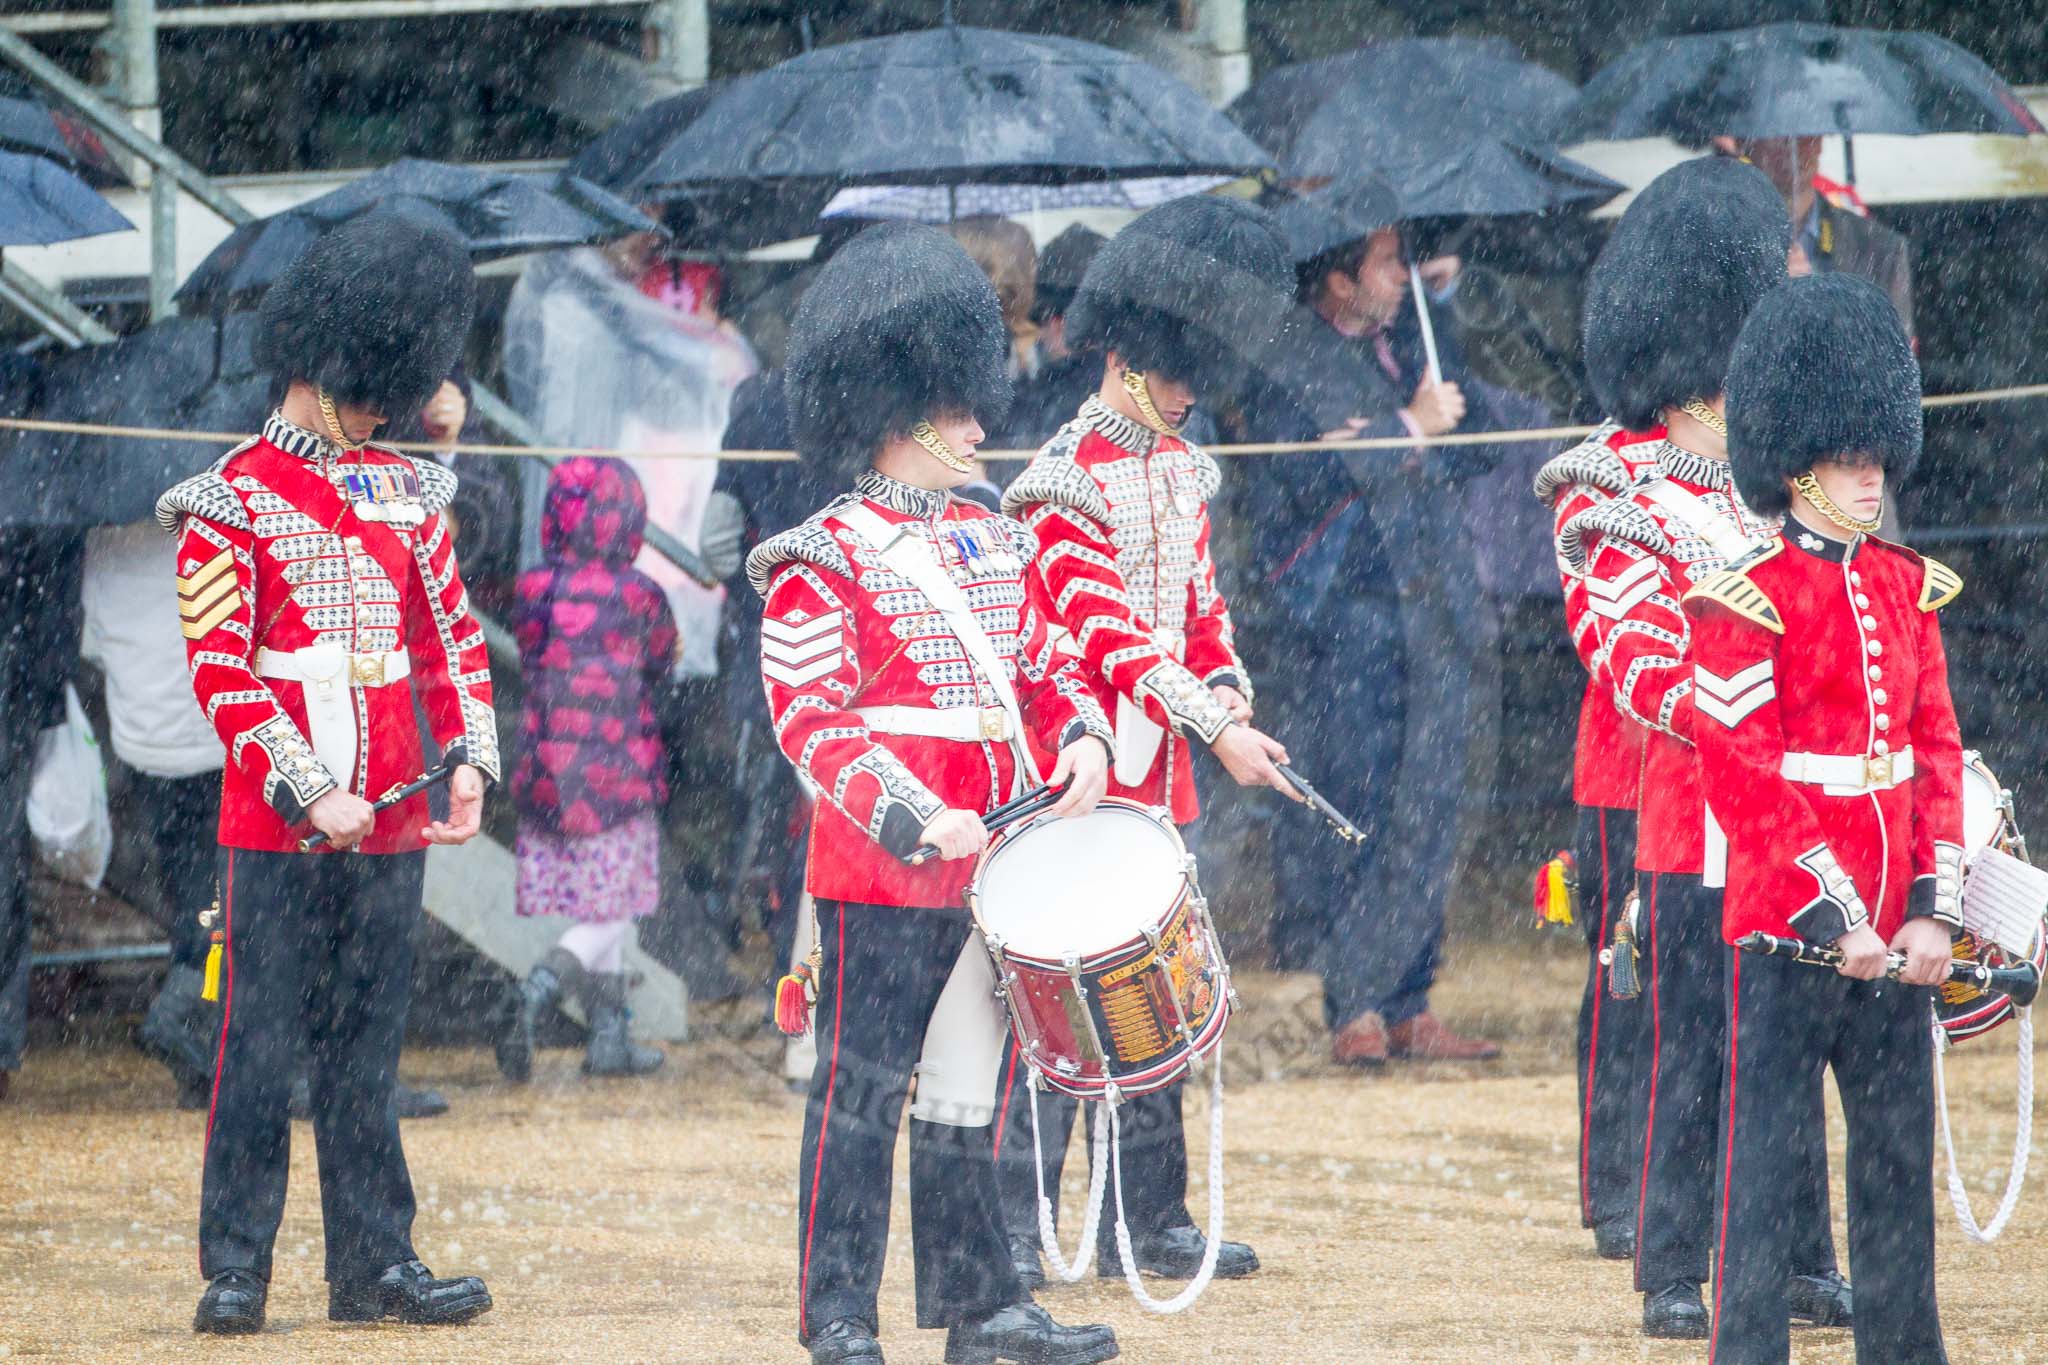 The Colonel's Review 2014.
Horse Guards Parade, Westminster,
London,

United Kingdom,
on 07 June 2014 at 10:47, image #195